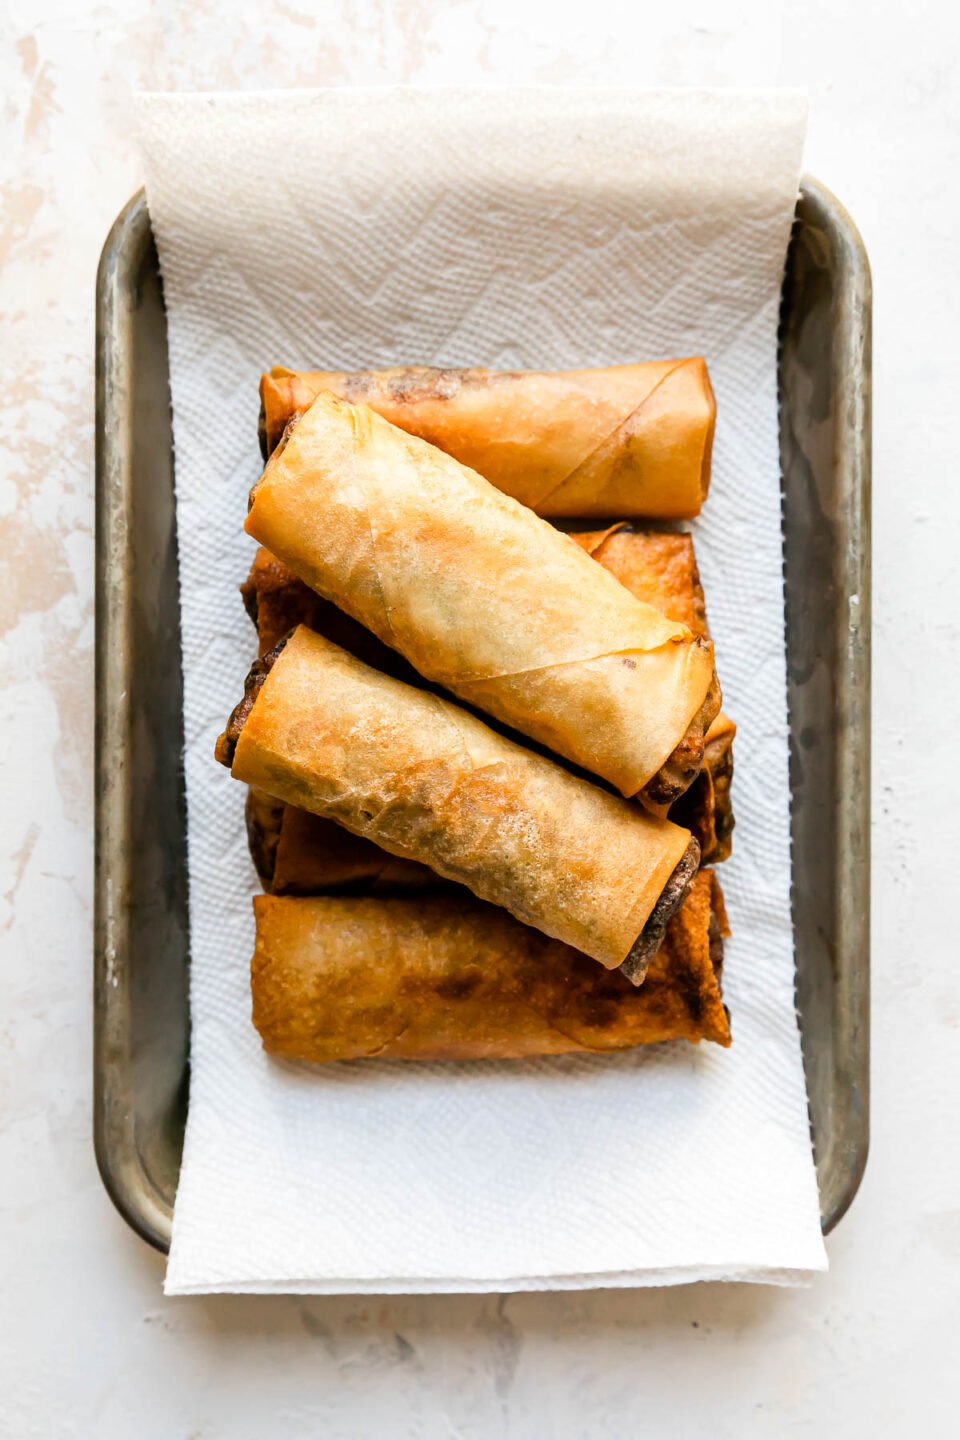 Fried pork egg rolls sit atop a small metal baking sheet pan lined with parchment paper. The sheet pan sits atop a creamy white textured surface.